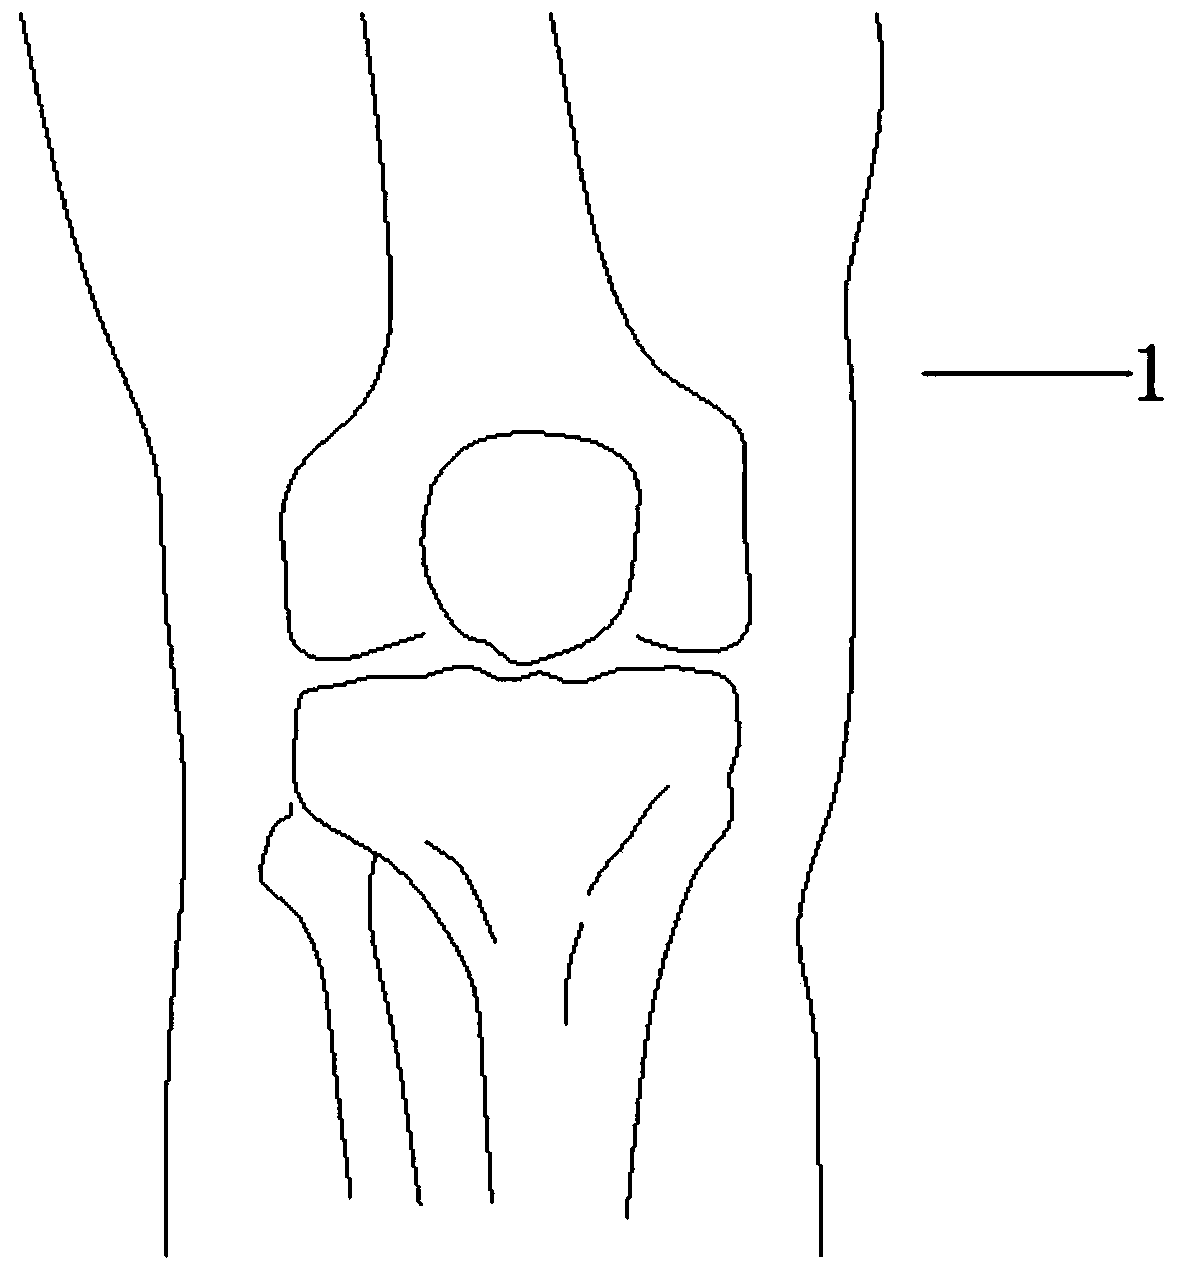 Device and method for standardized tracing of parts of pain and pressing pain of knee joints